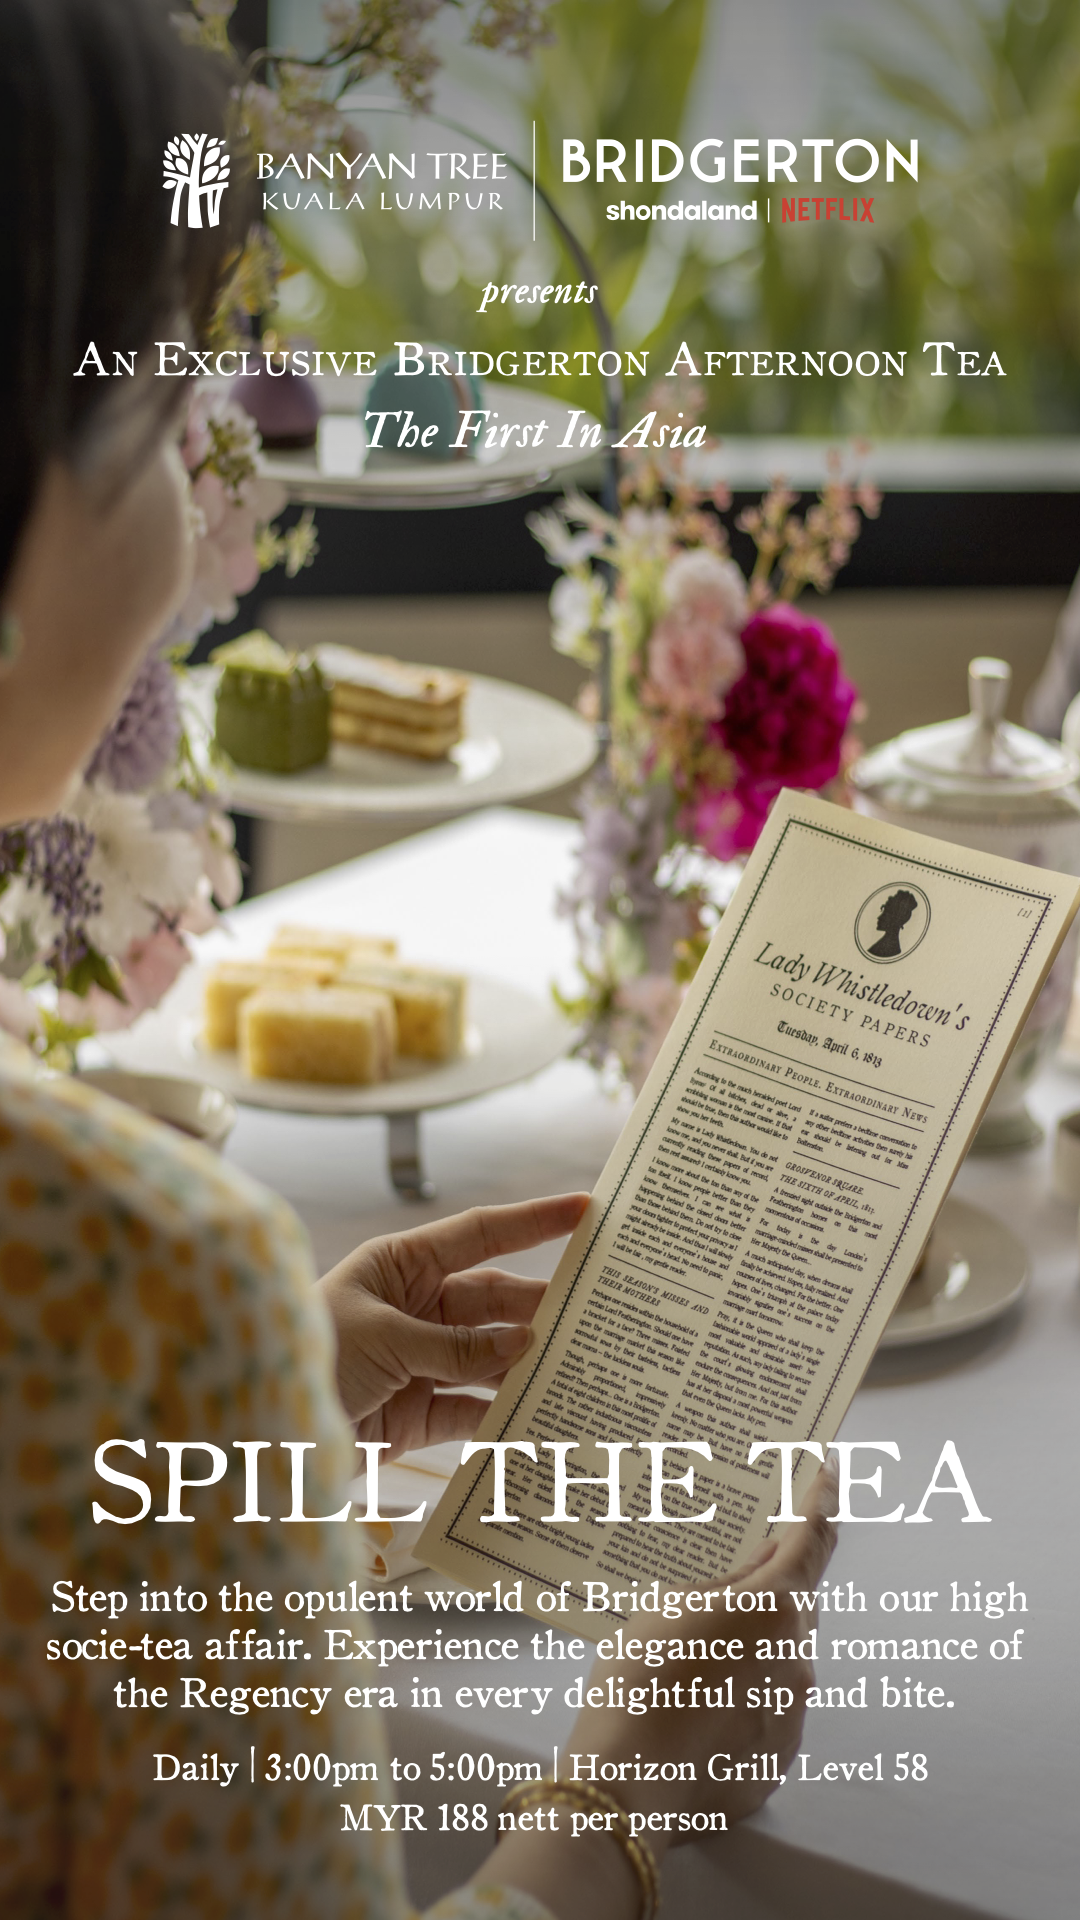 Spill the tea: Bridgerton Poster, hands of a woman with a menu of the experience